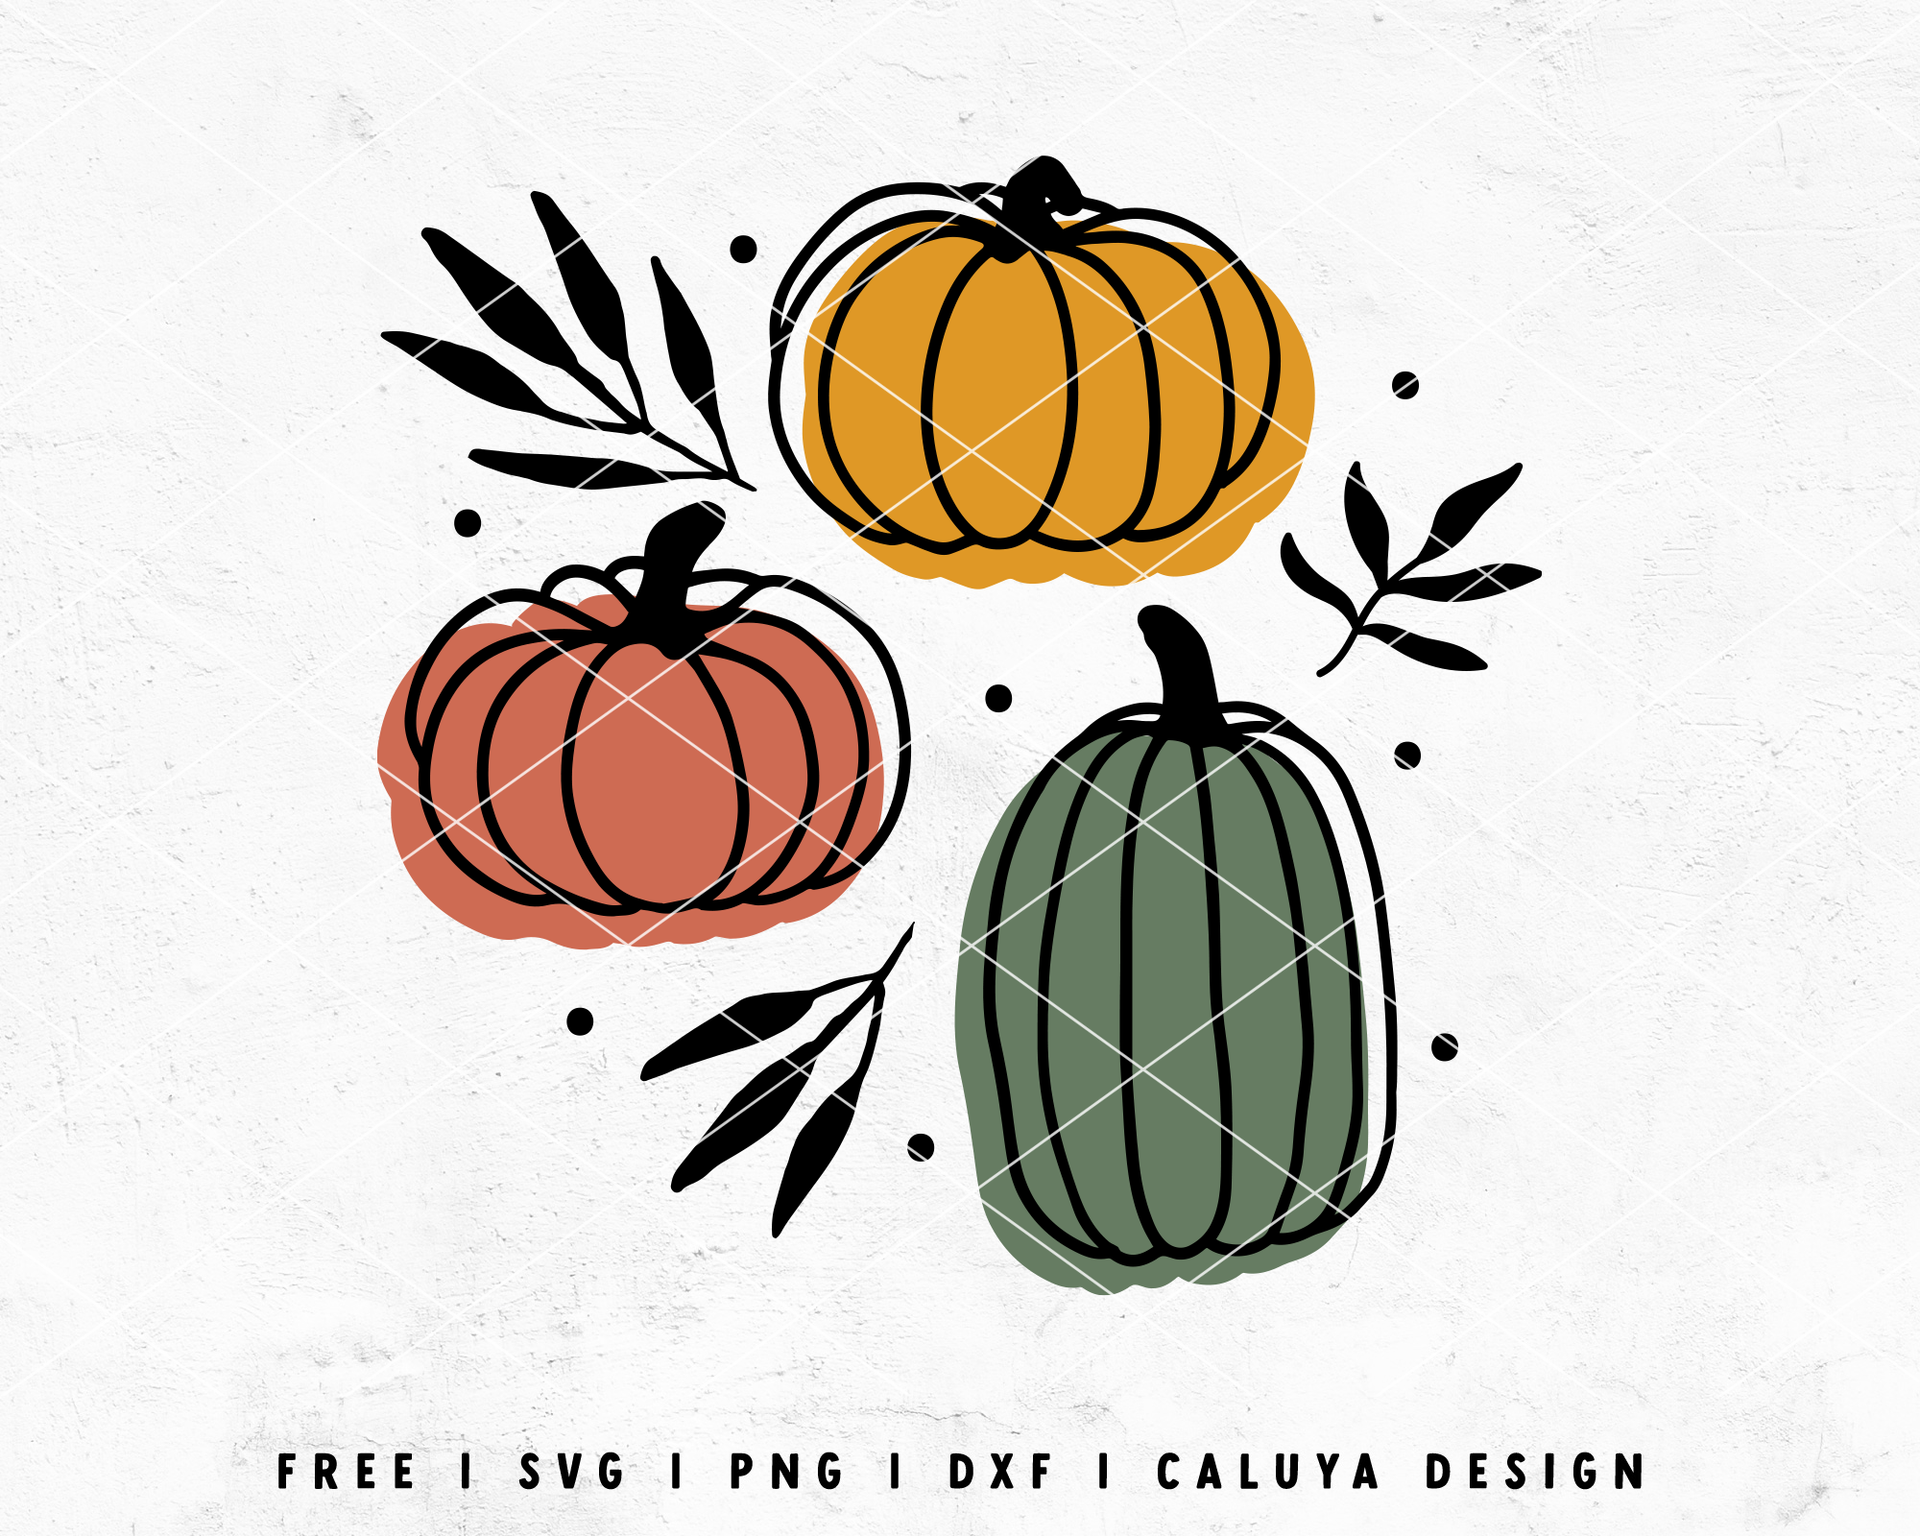 31 Pumpkin SVGs for Halloween, Fall, and Harvest Season